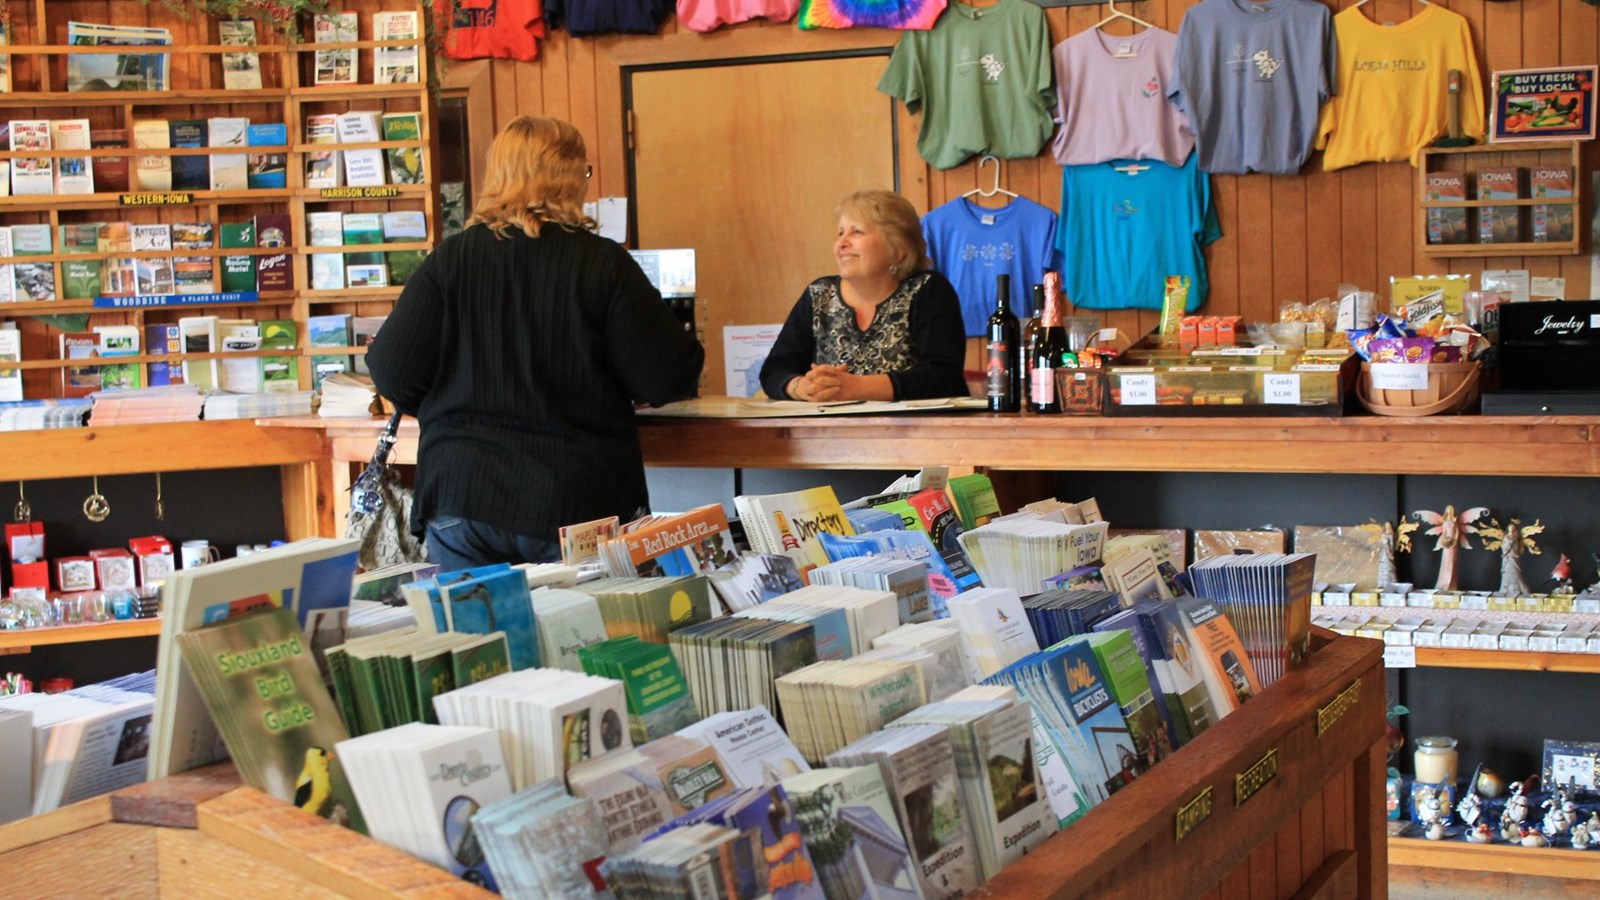 woman speaking to another woman behind a counter in a room filled with shirts, fliers, and souvenirs